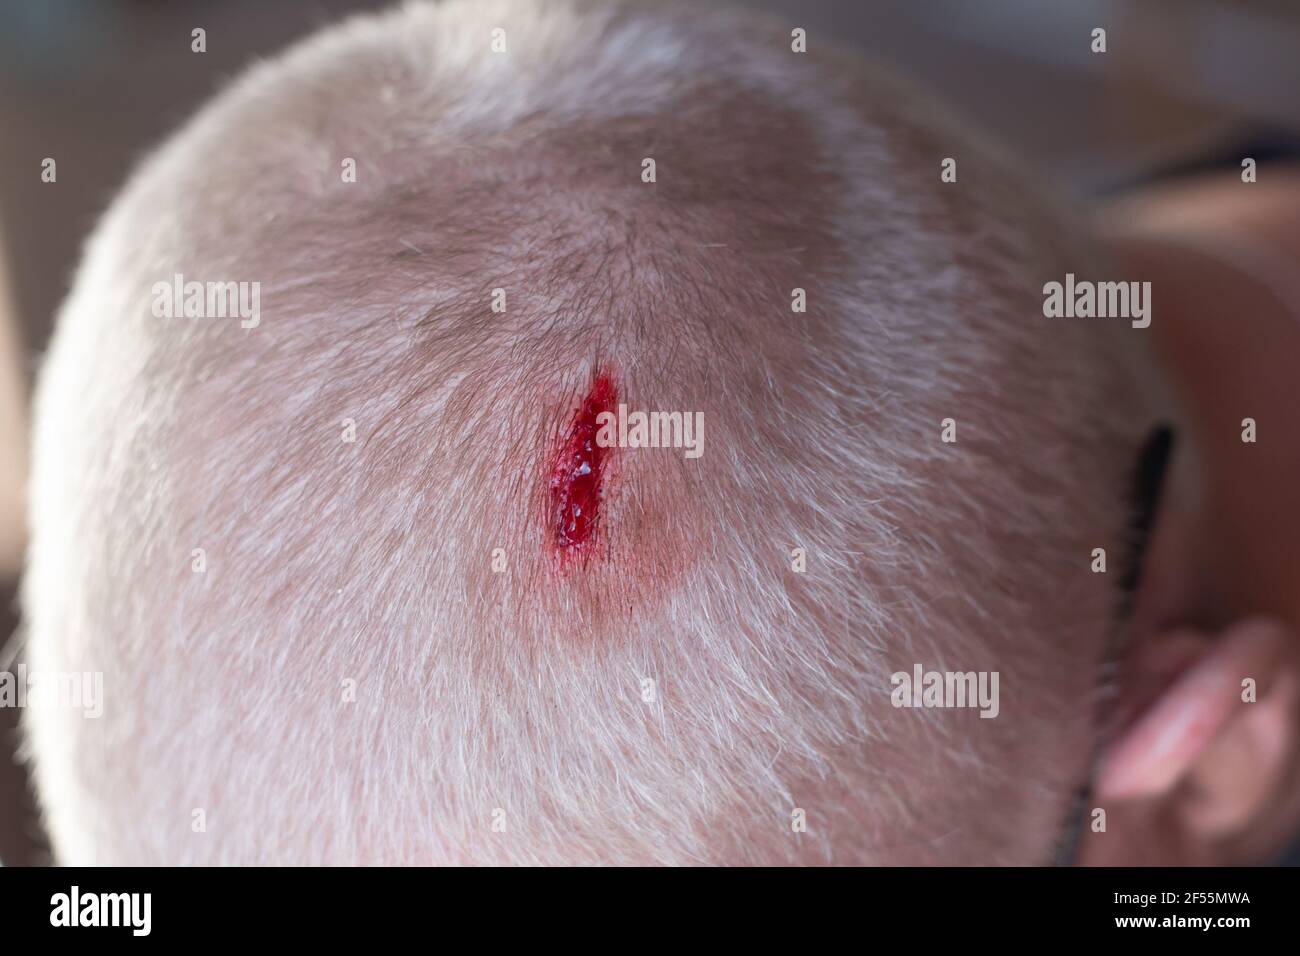 Injury to the scalp. Blood leaks from a chopped wound on the head of a blond man due to falling metal reinforcement. Non-observance of safety .precaut Stock Photo